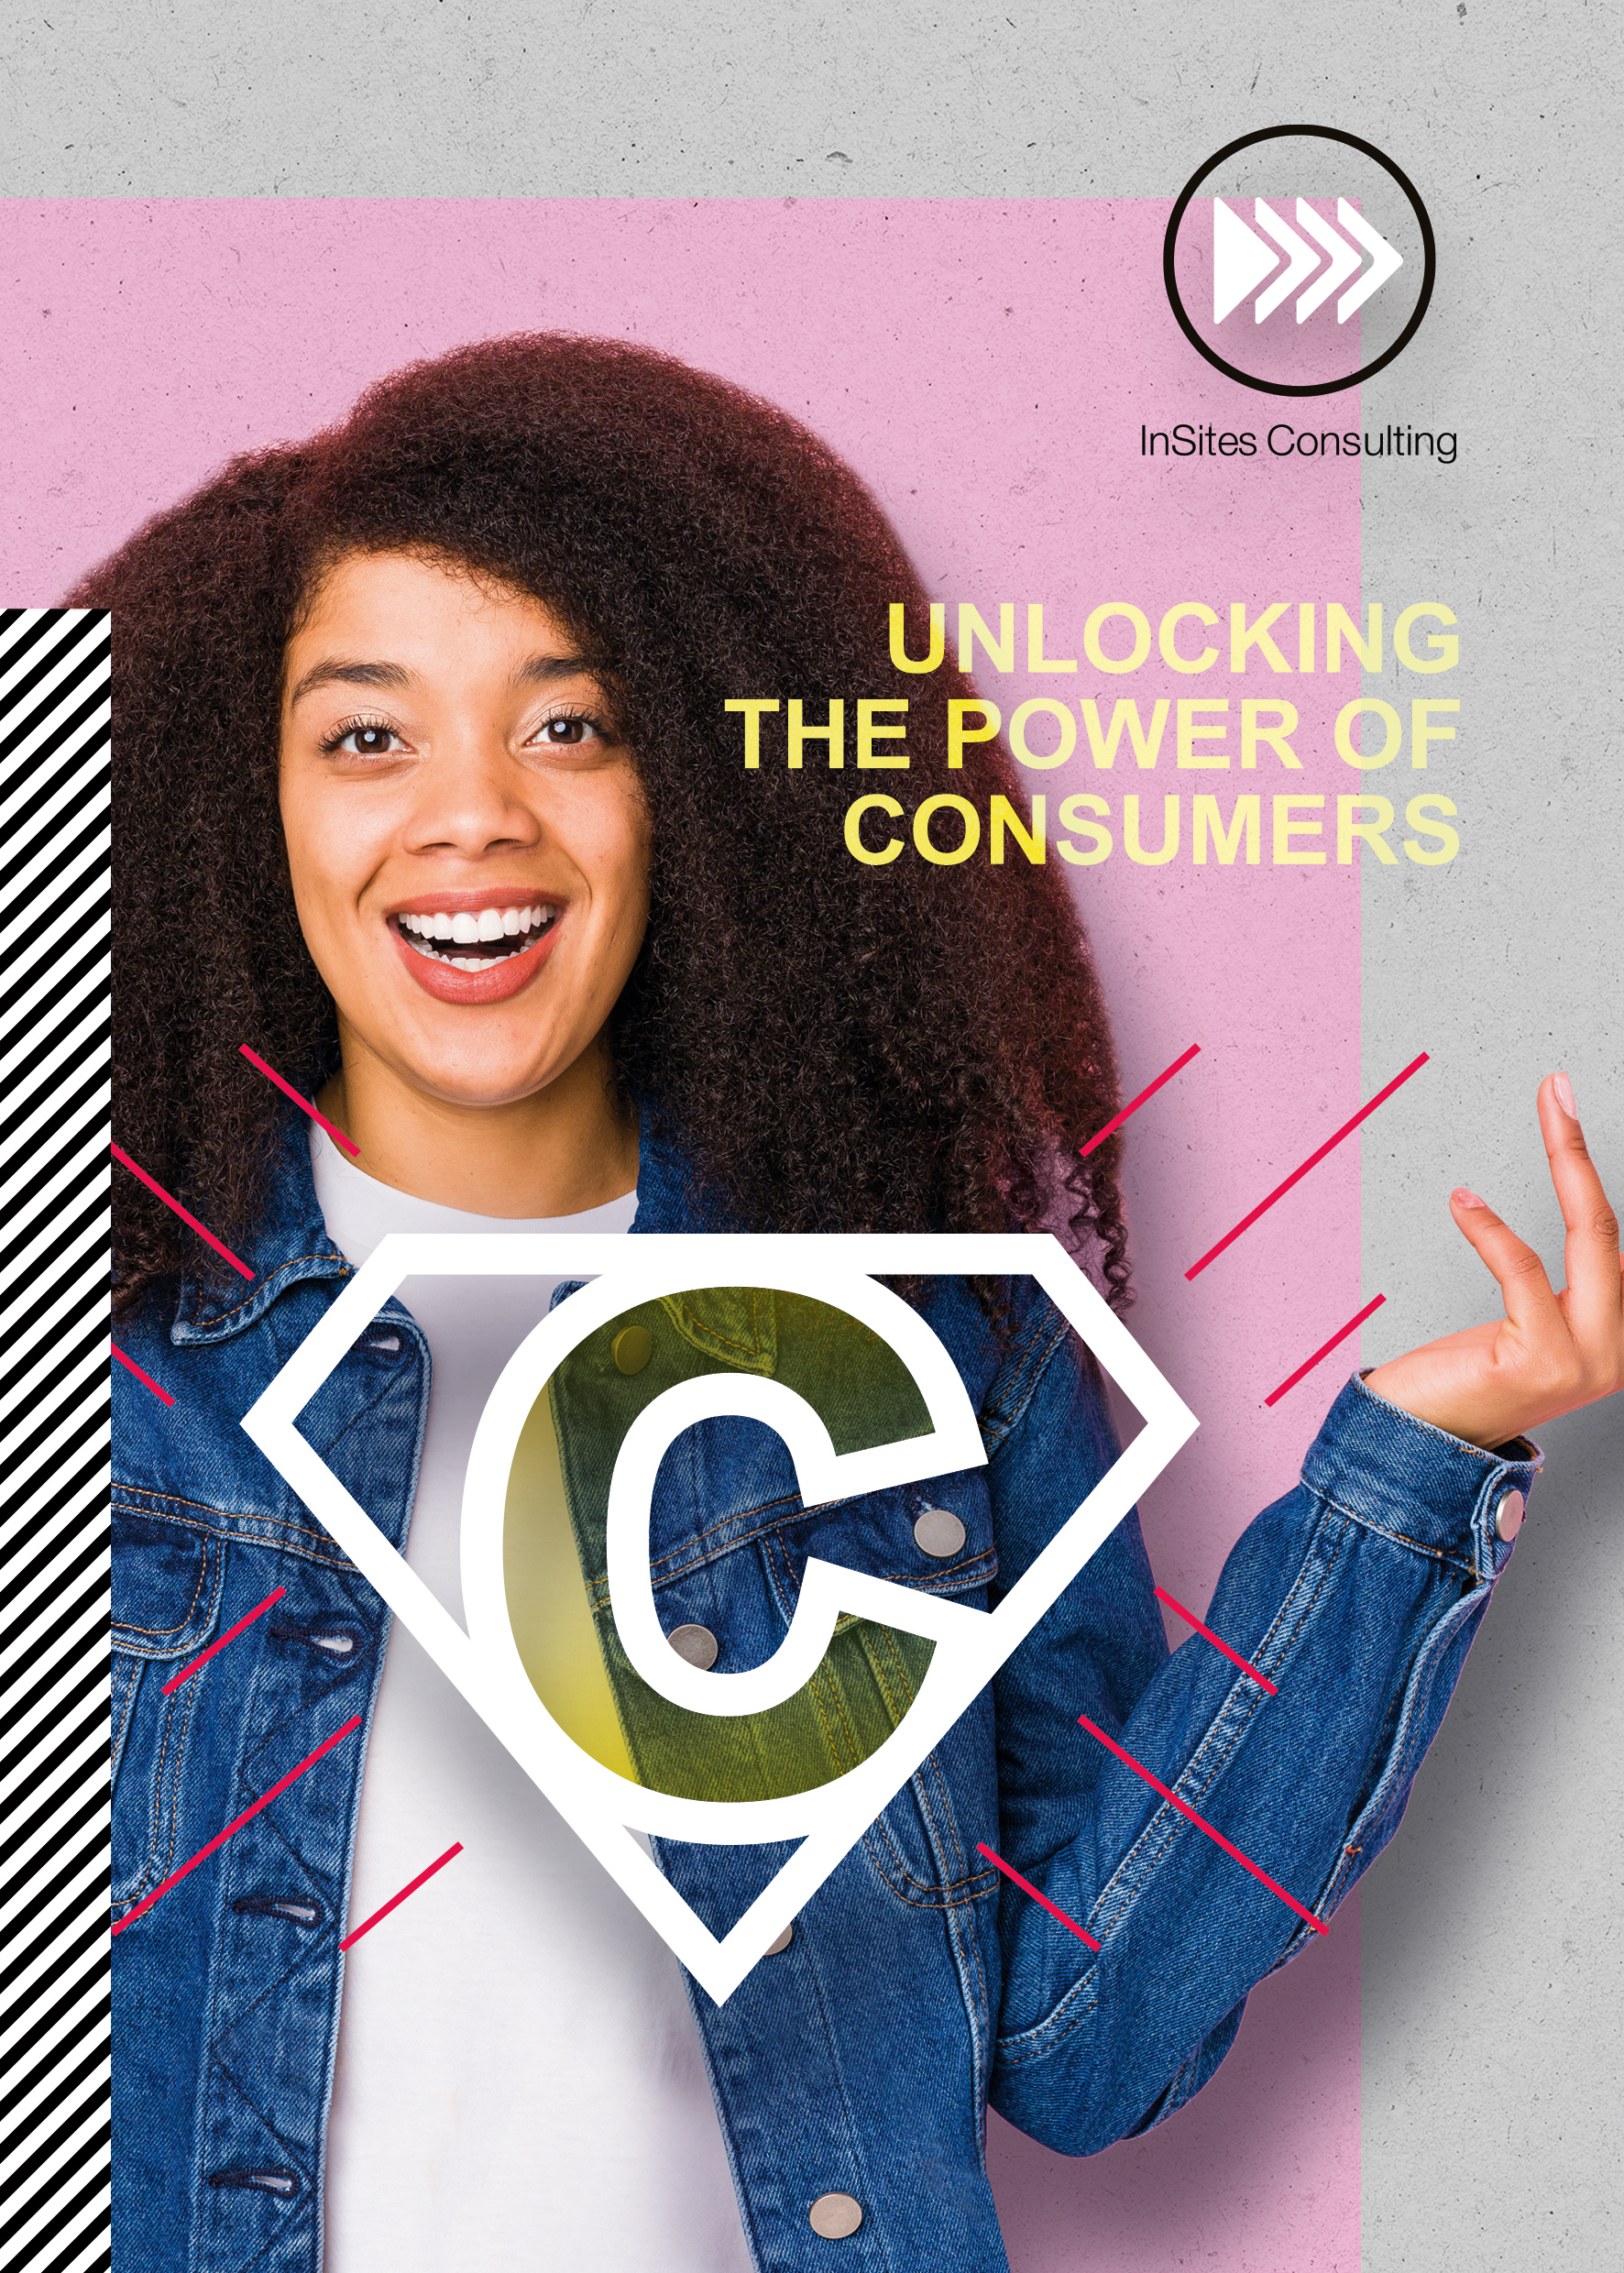 Unlocking the power of consumers